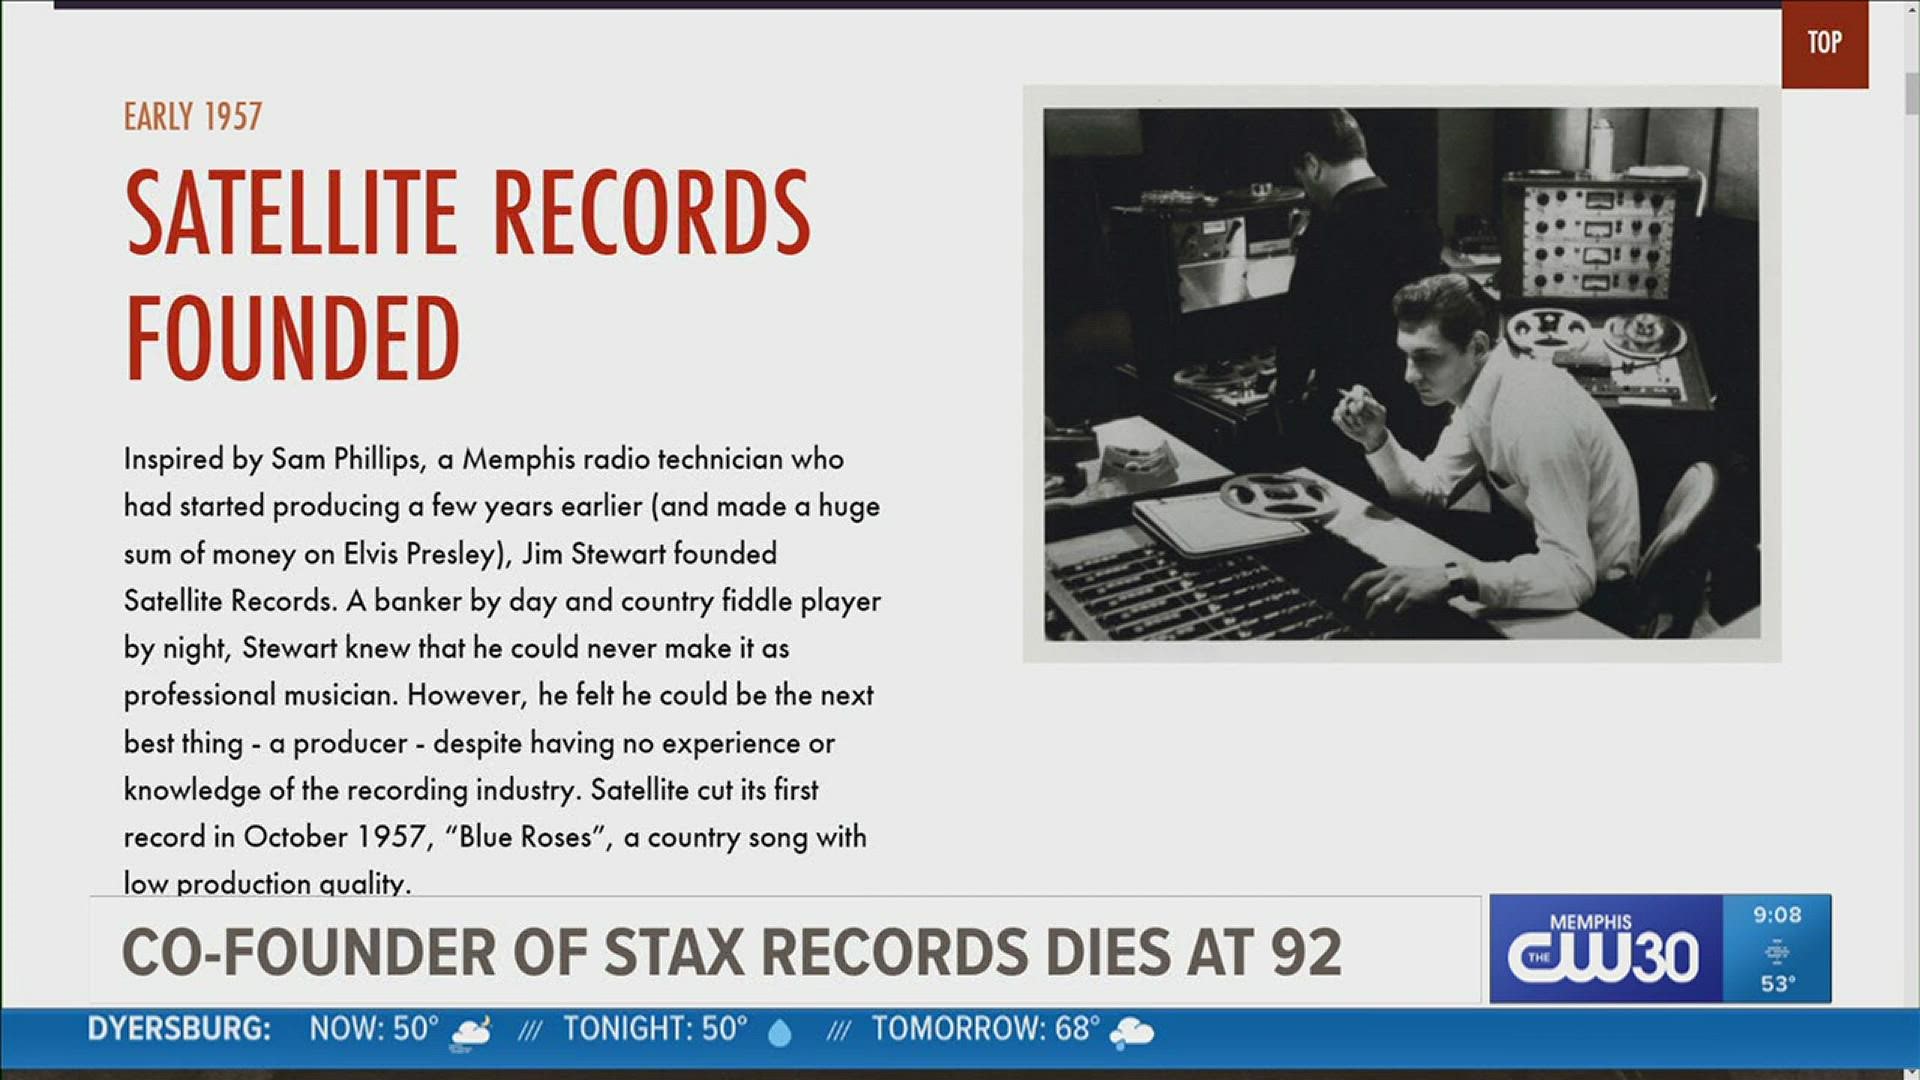 The longtime Memphis resident founded Satellite Records, which was later known as Stax, in the late 1950s.